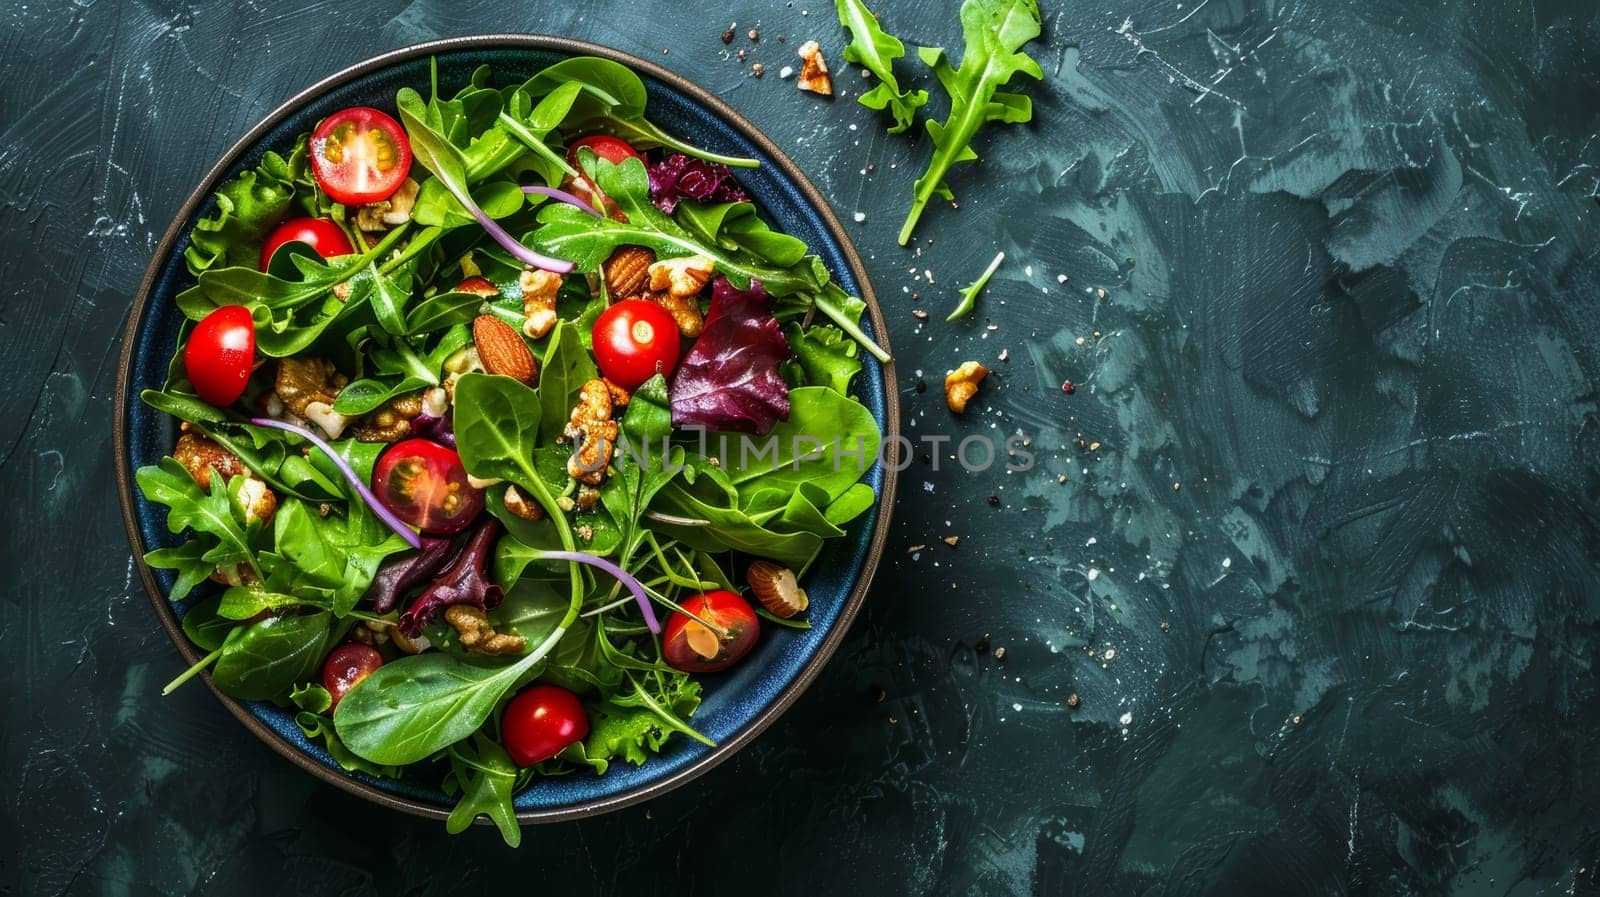 A vibrant mix of green leaves, cherry tomatoes, and nuts in a dark bowl on a textured dark background, portraying healthy eating. Banner with copy space by sfinks